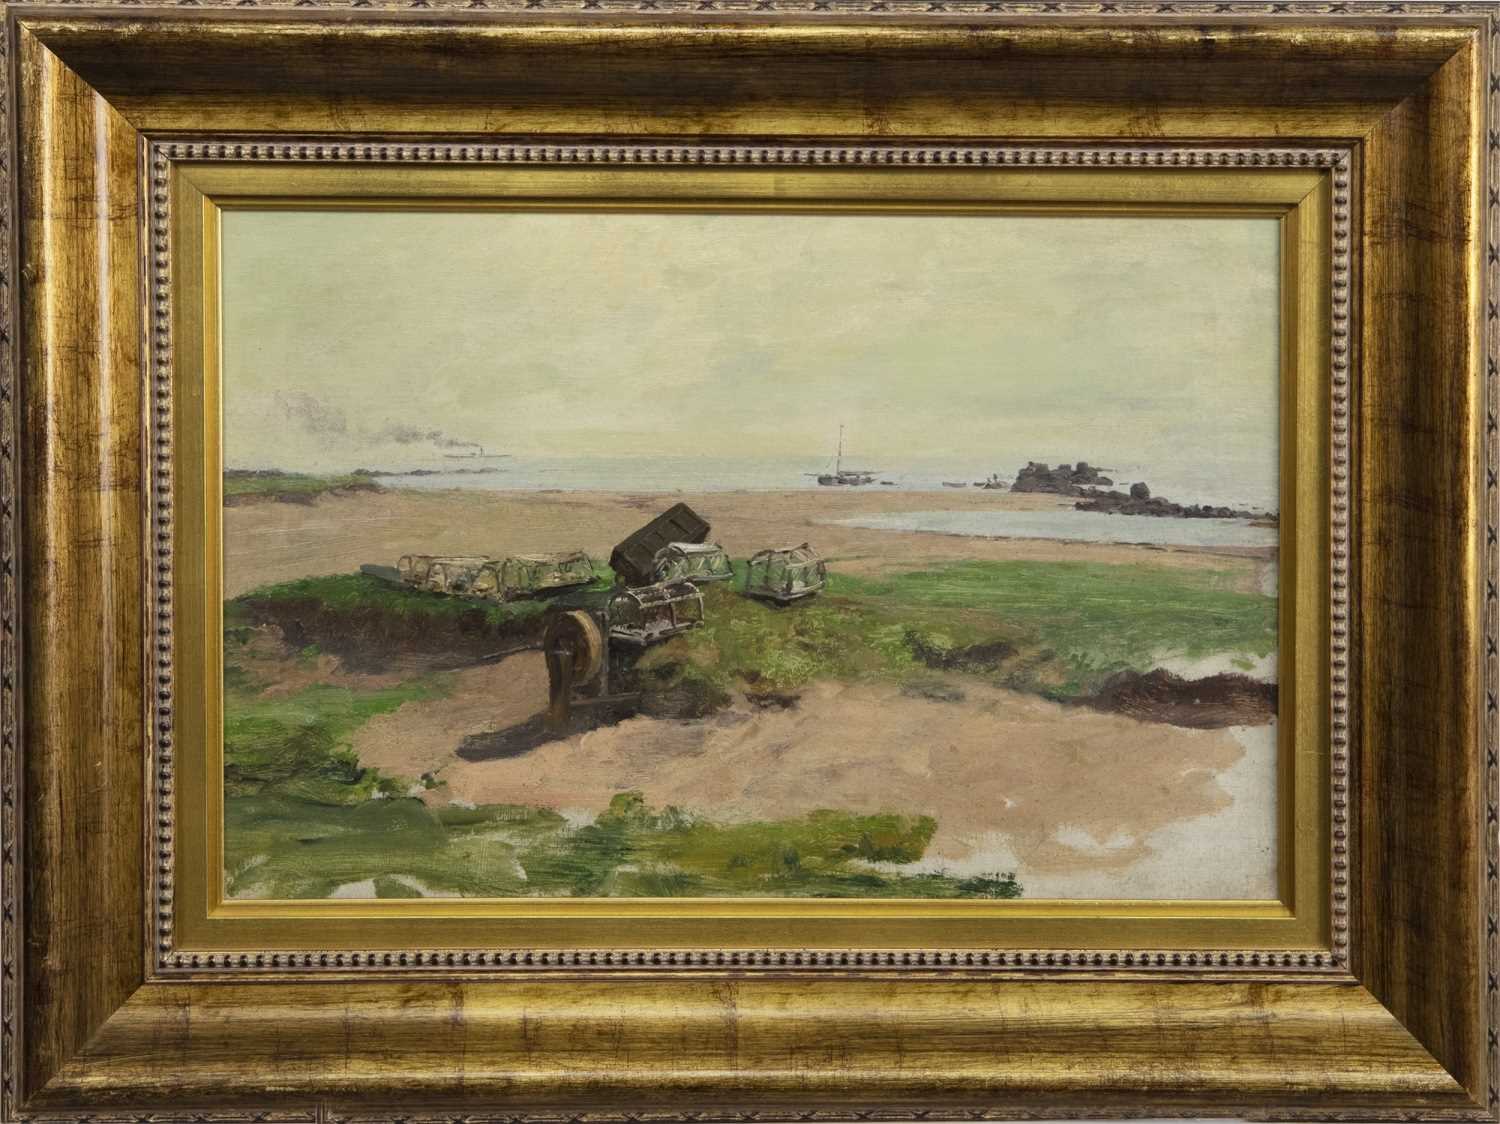 Lot 267 - COASTAL SCENE WITH LOBSTER POTS, AN OIL BY ROBERT CREE CRAWFORD